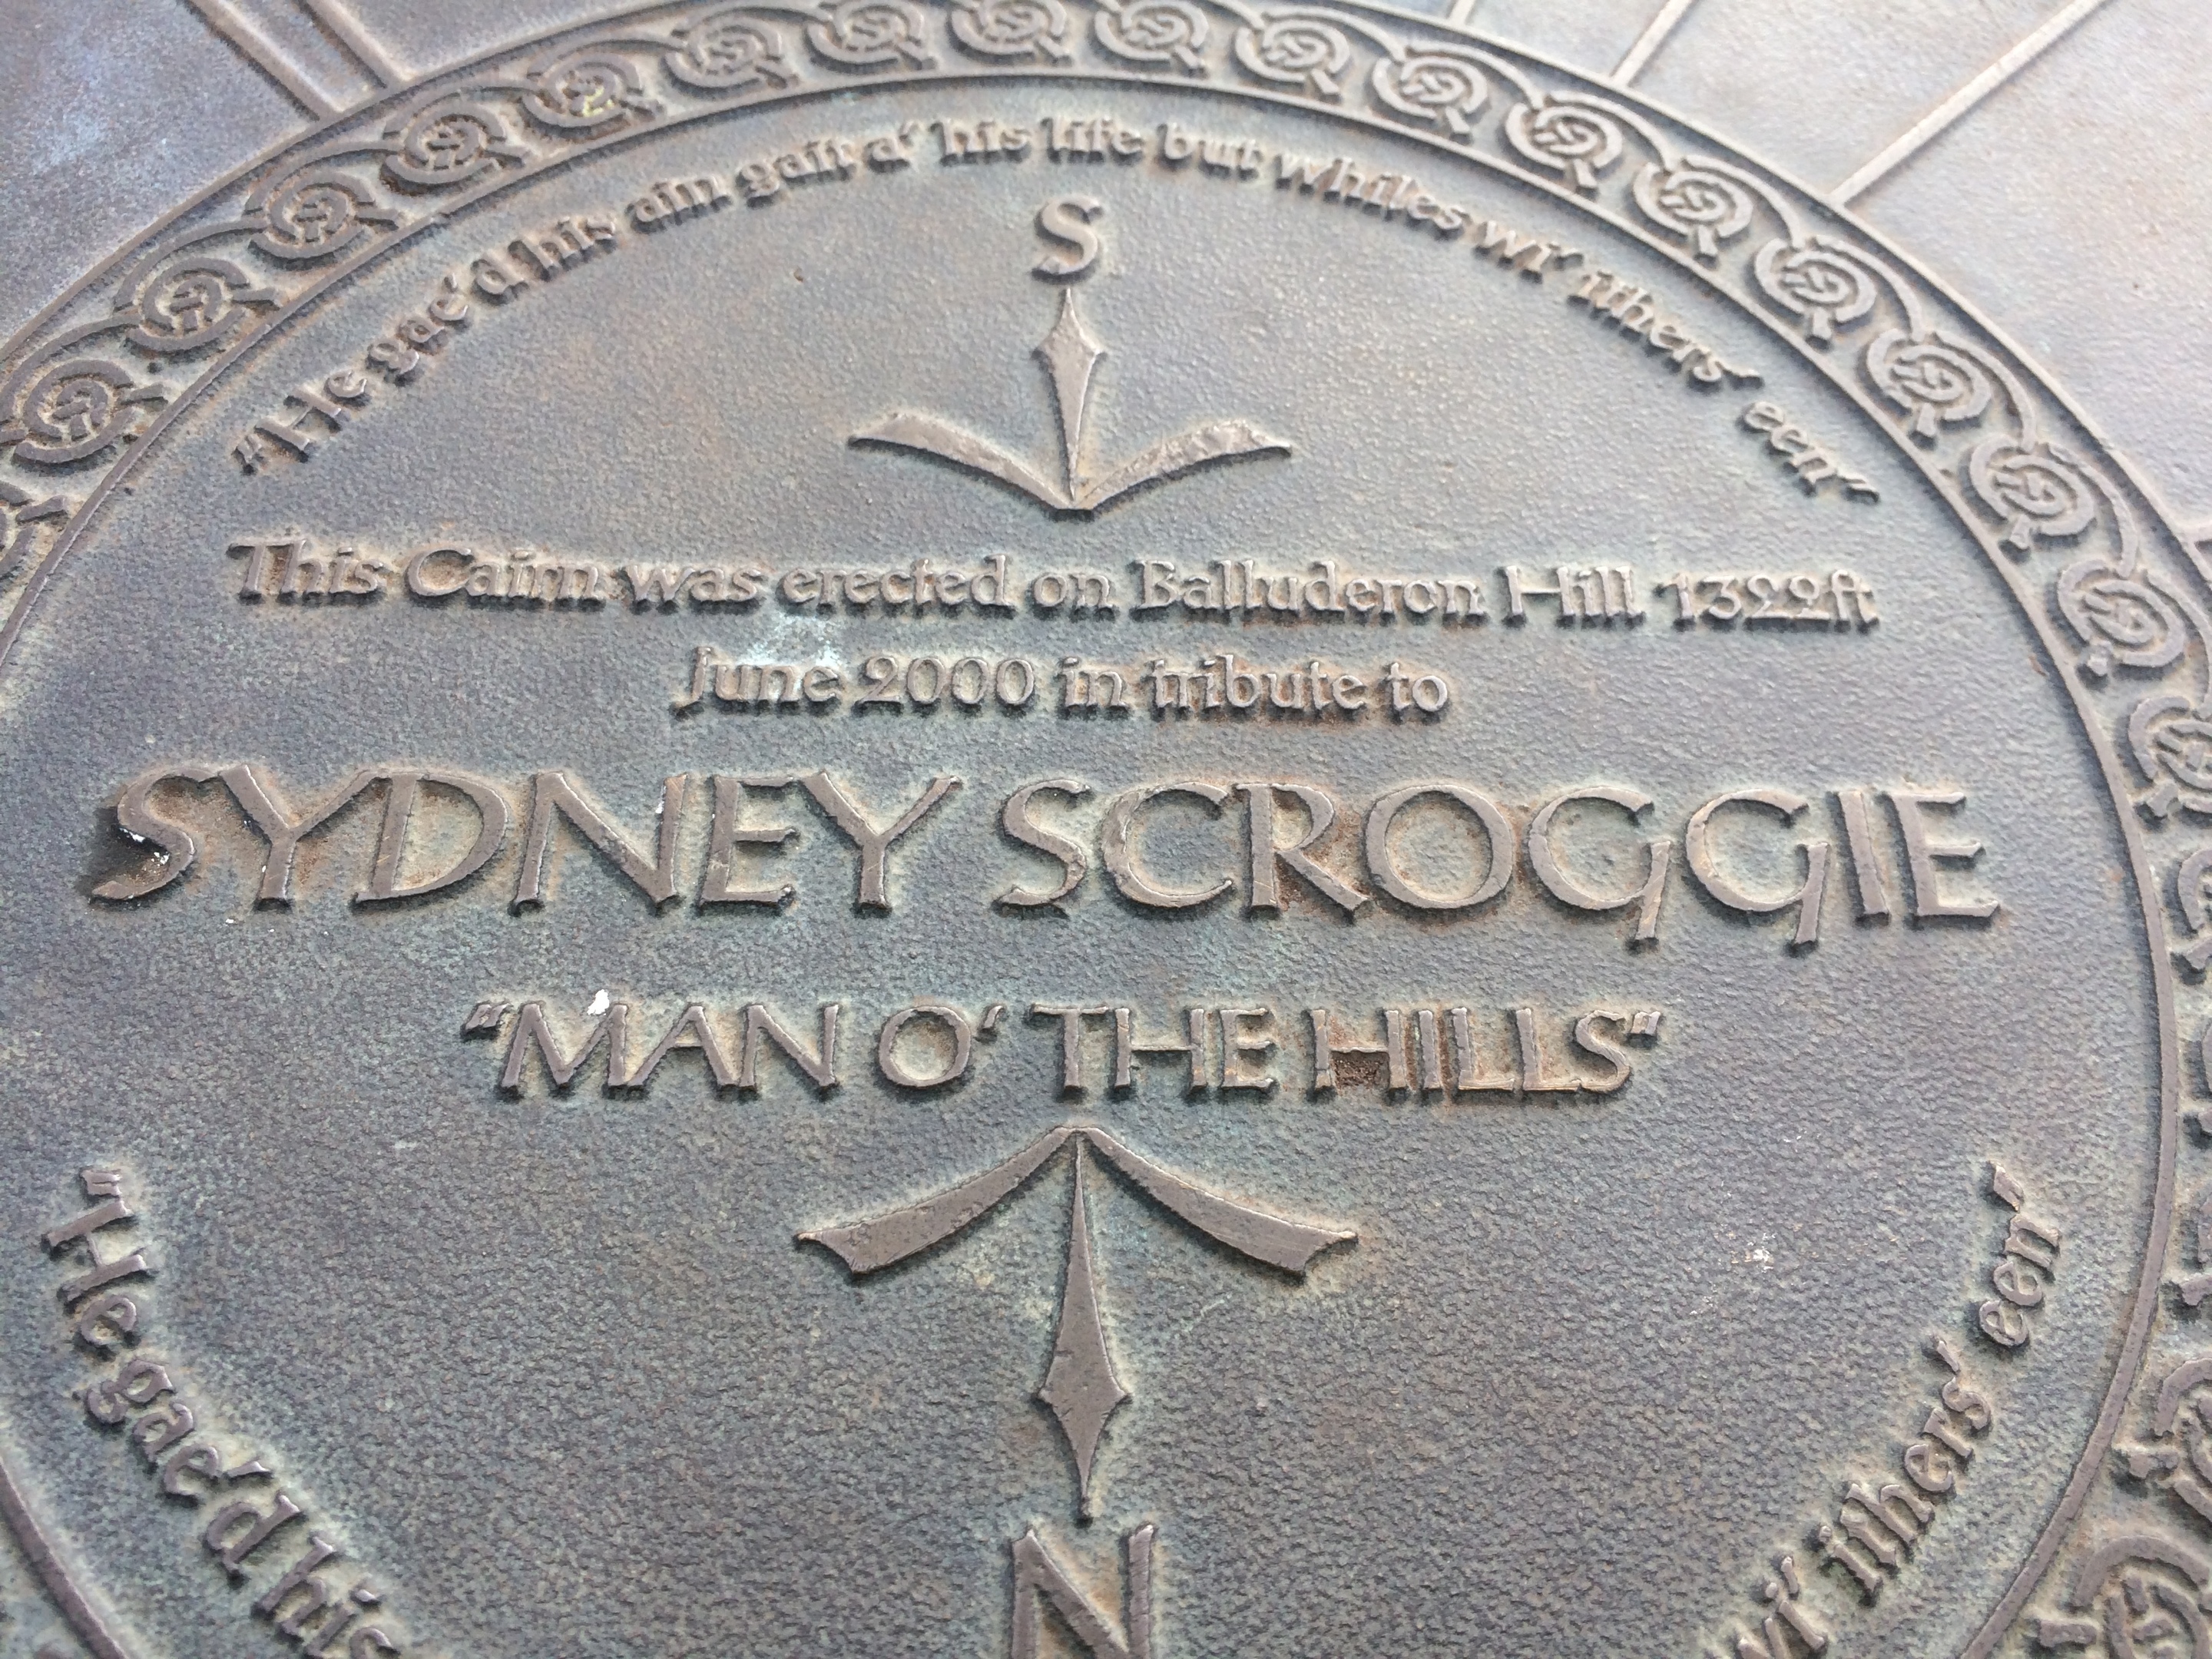 The Syd Scroggie memorial plaque on the top of Balluderon Hill.